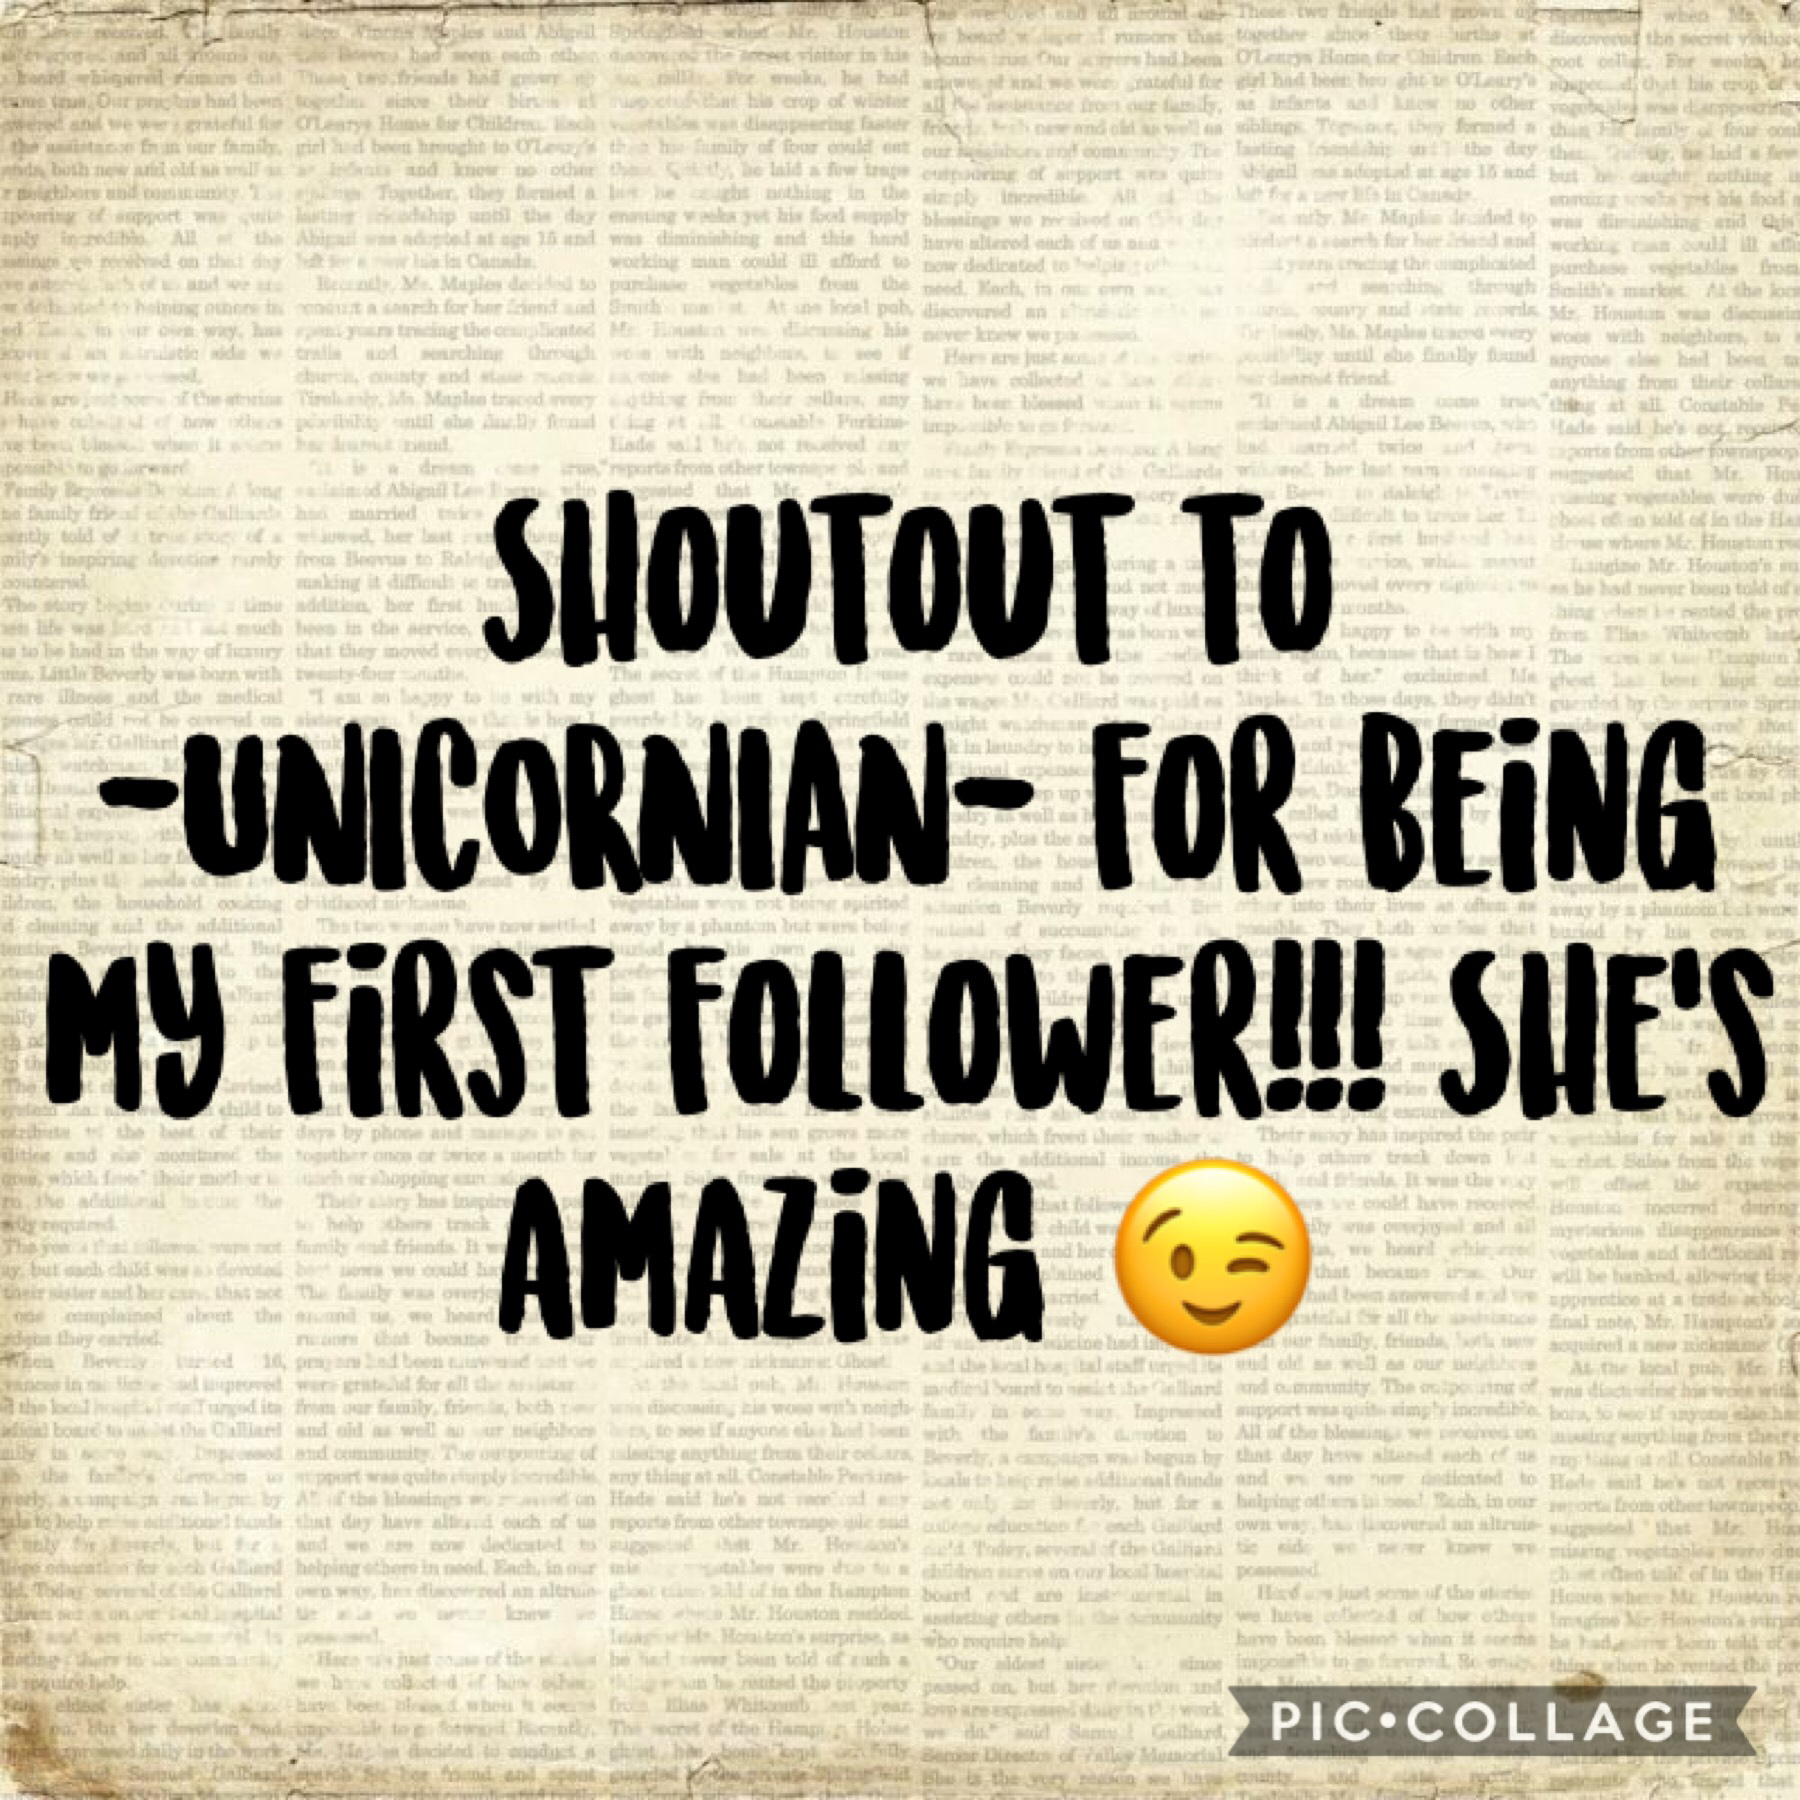 -Tap-


Hey y’all follow -UNICORNIAN- she’s awesome!! 😎 